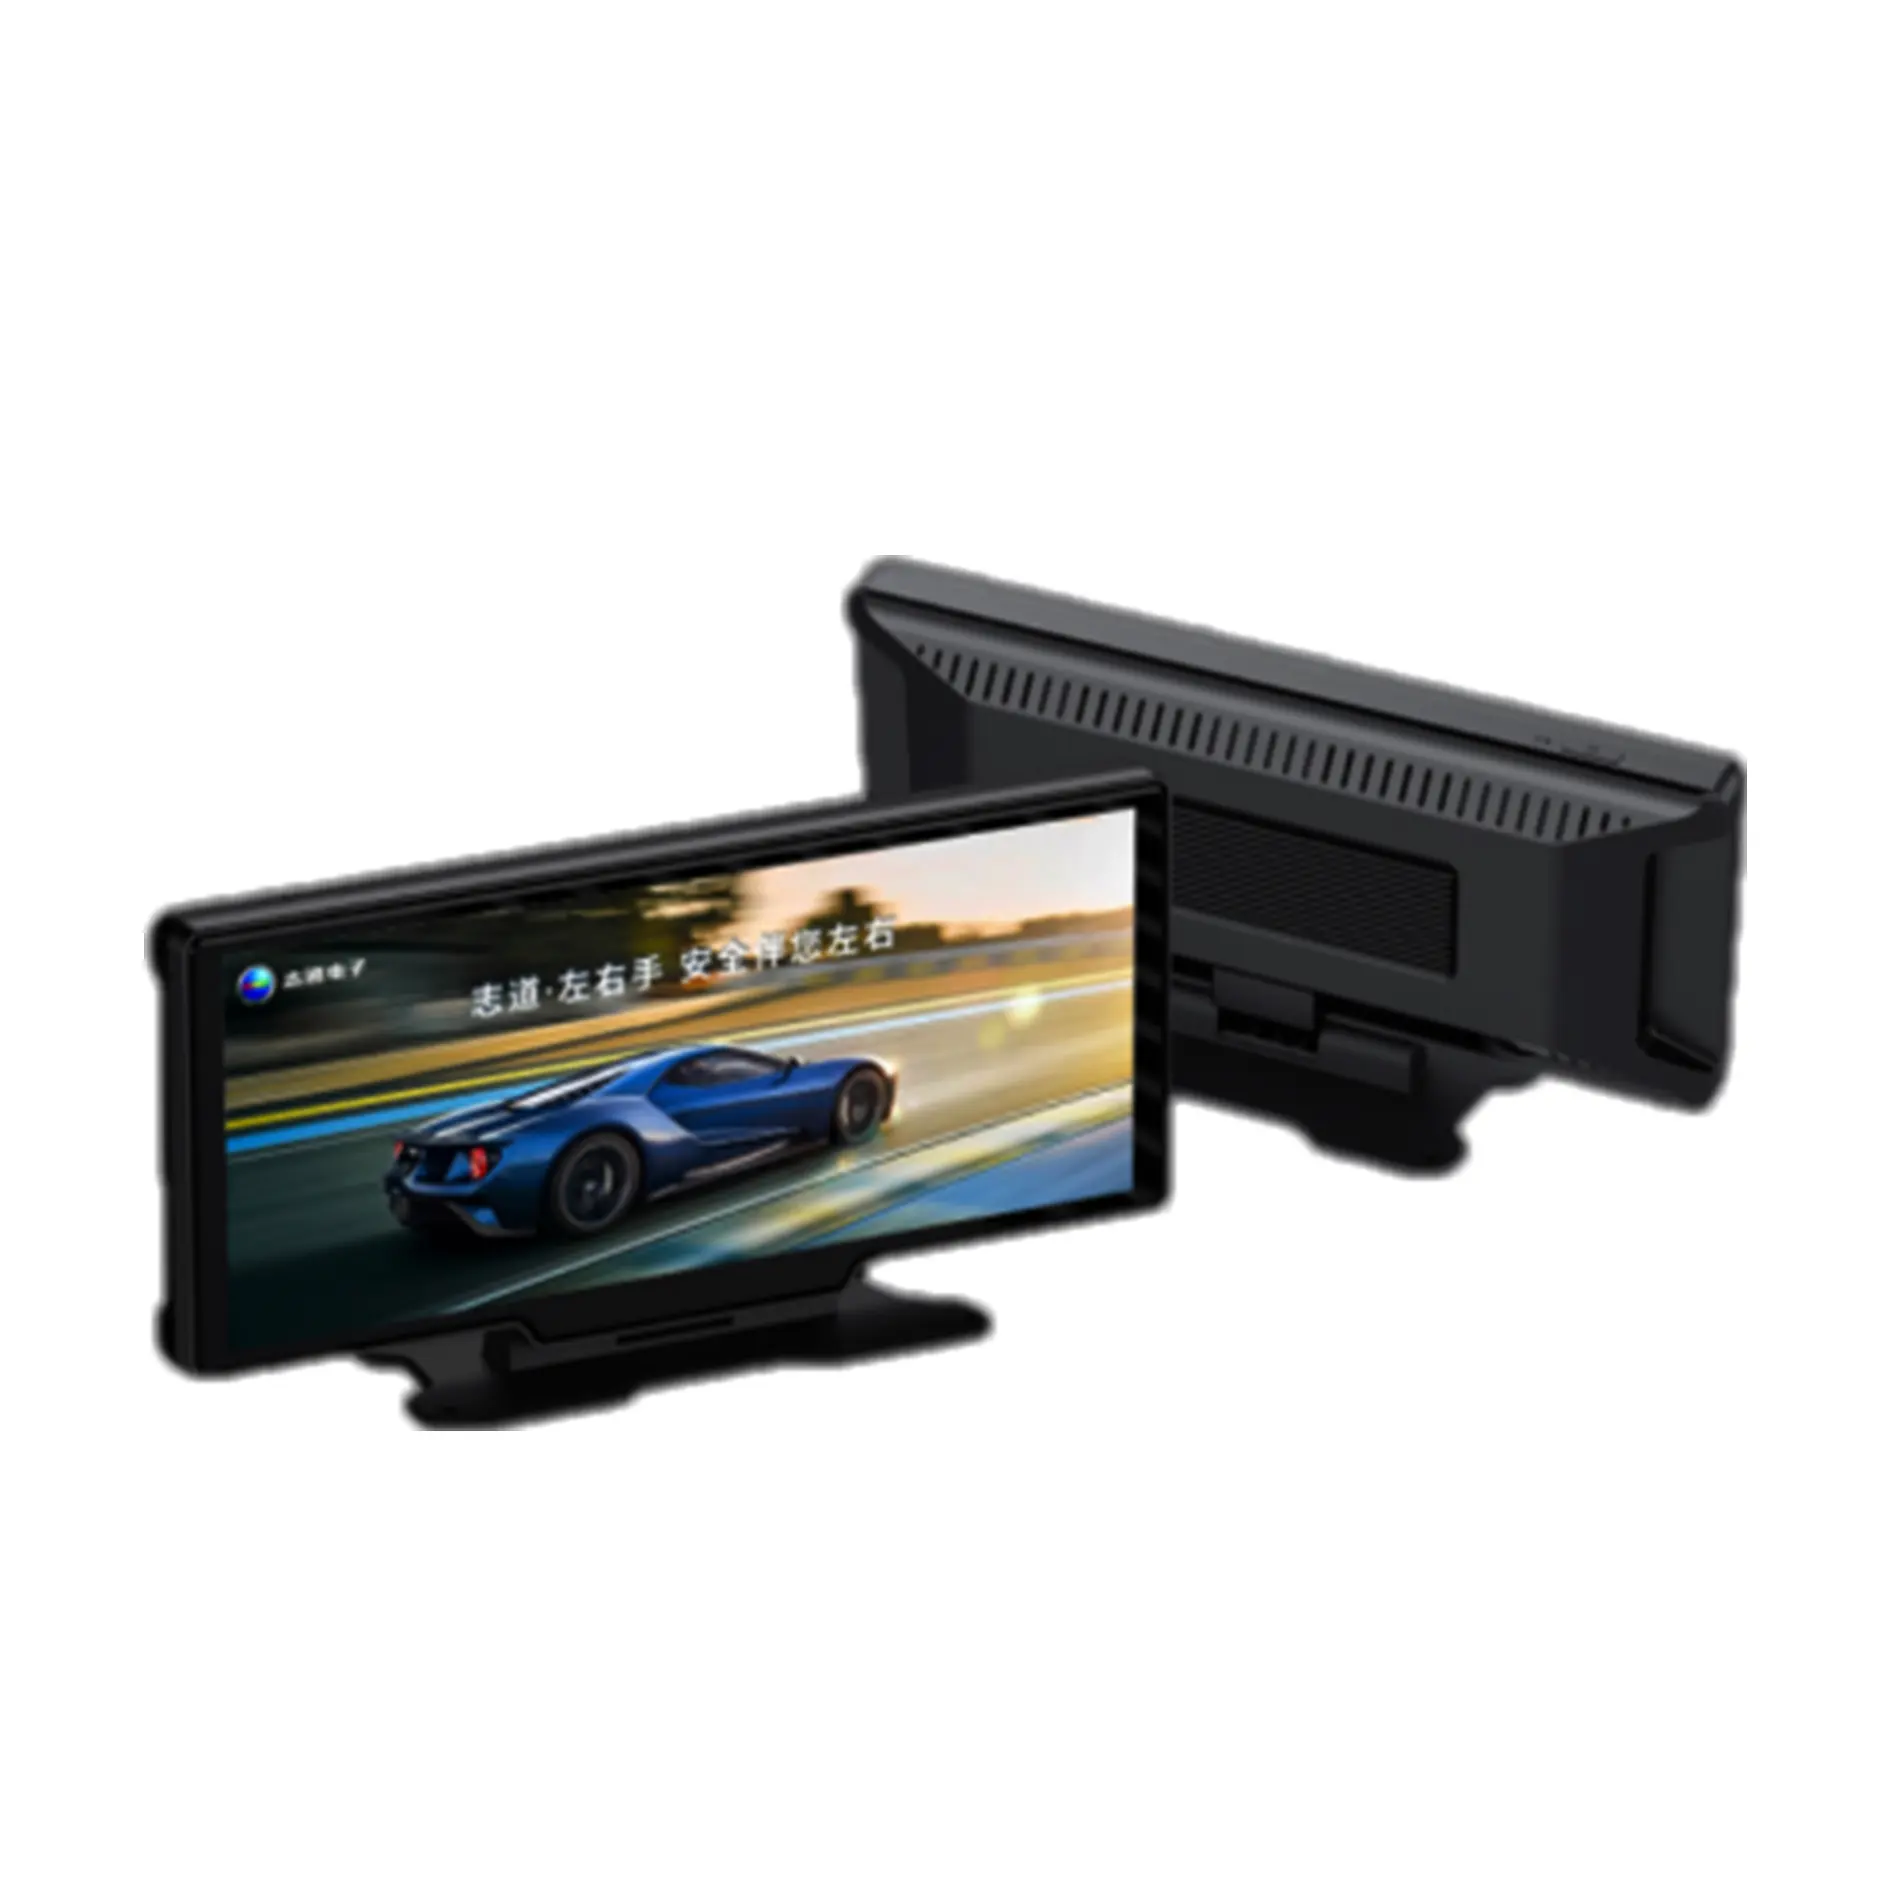 4K 10 Inch Android Smart Around View Camera Monitoring Touching Driving Assistance System Car Rear View Mirror Monitor